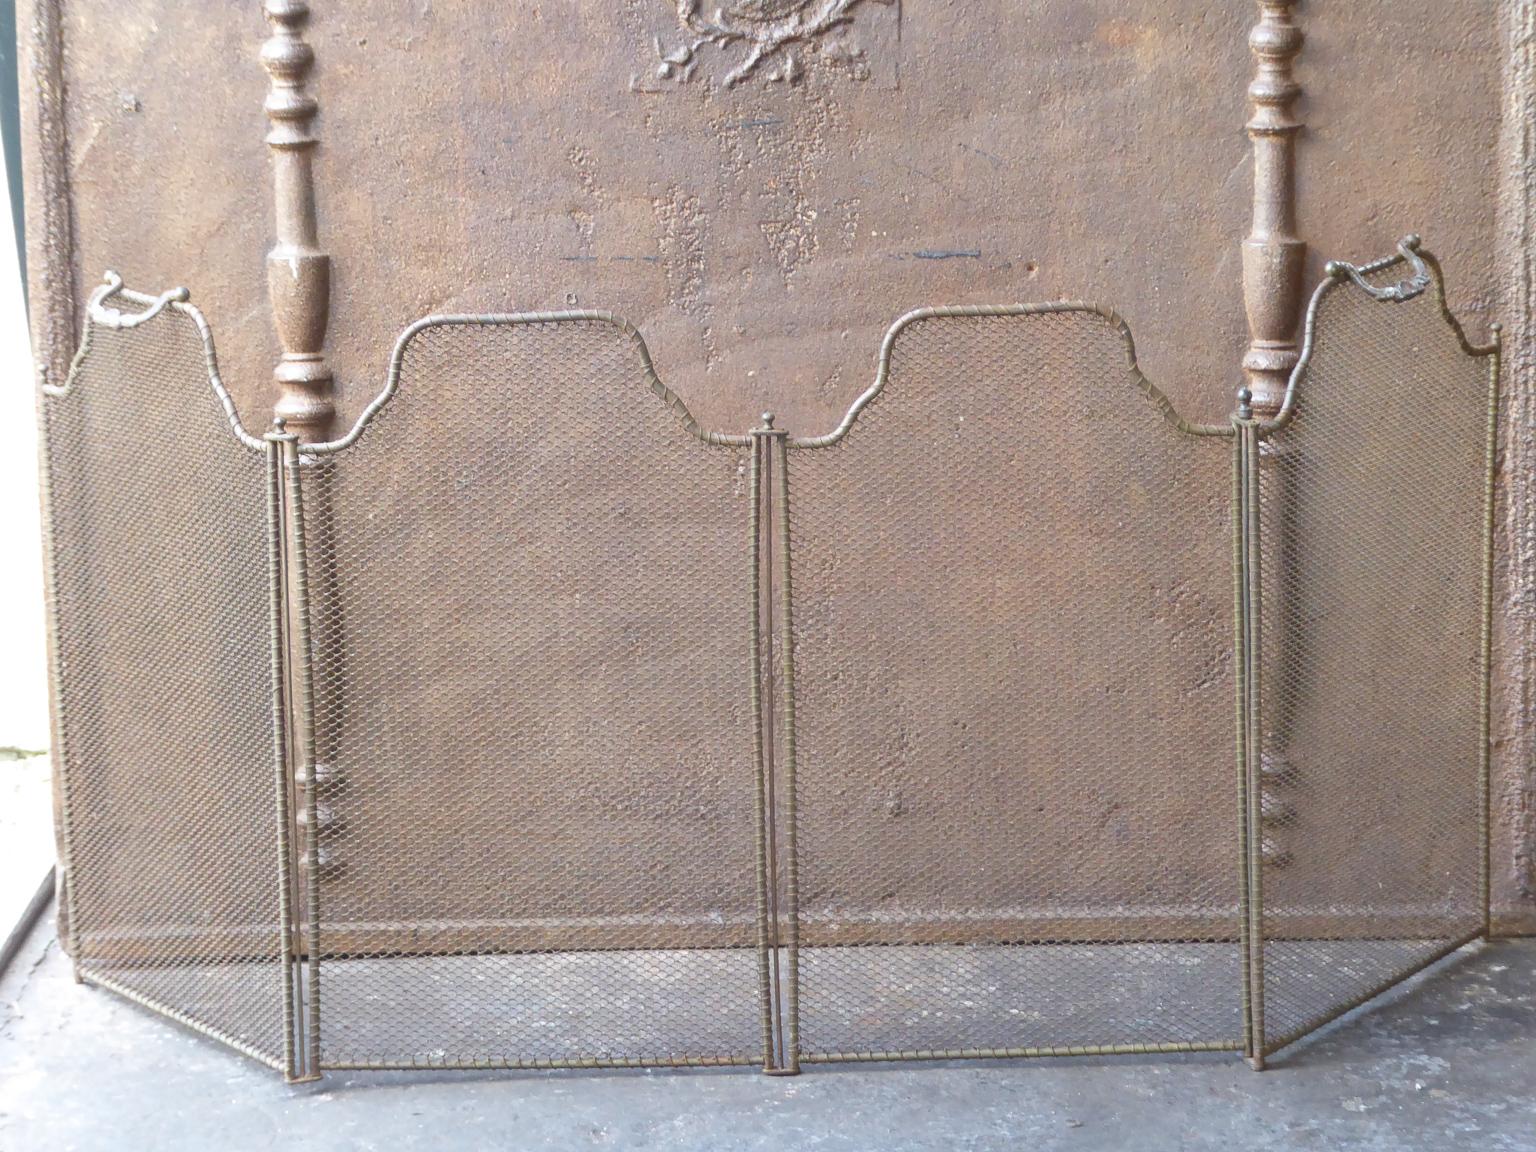 19th century French Napoleon III four panel fireplace screen. The screen is made of iron and iron mesh. It is in a good condition and is fit for use in front of the fireplace.